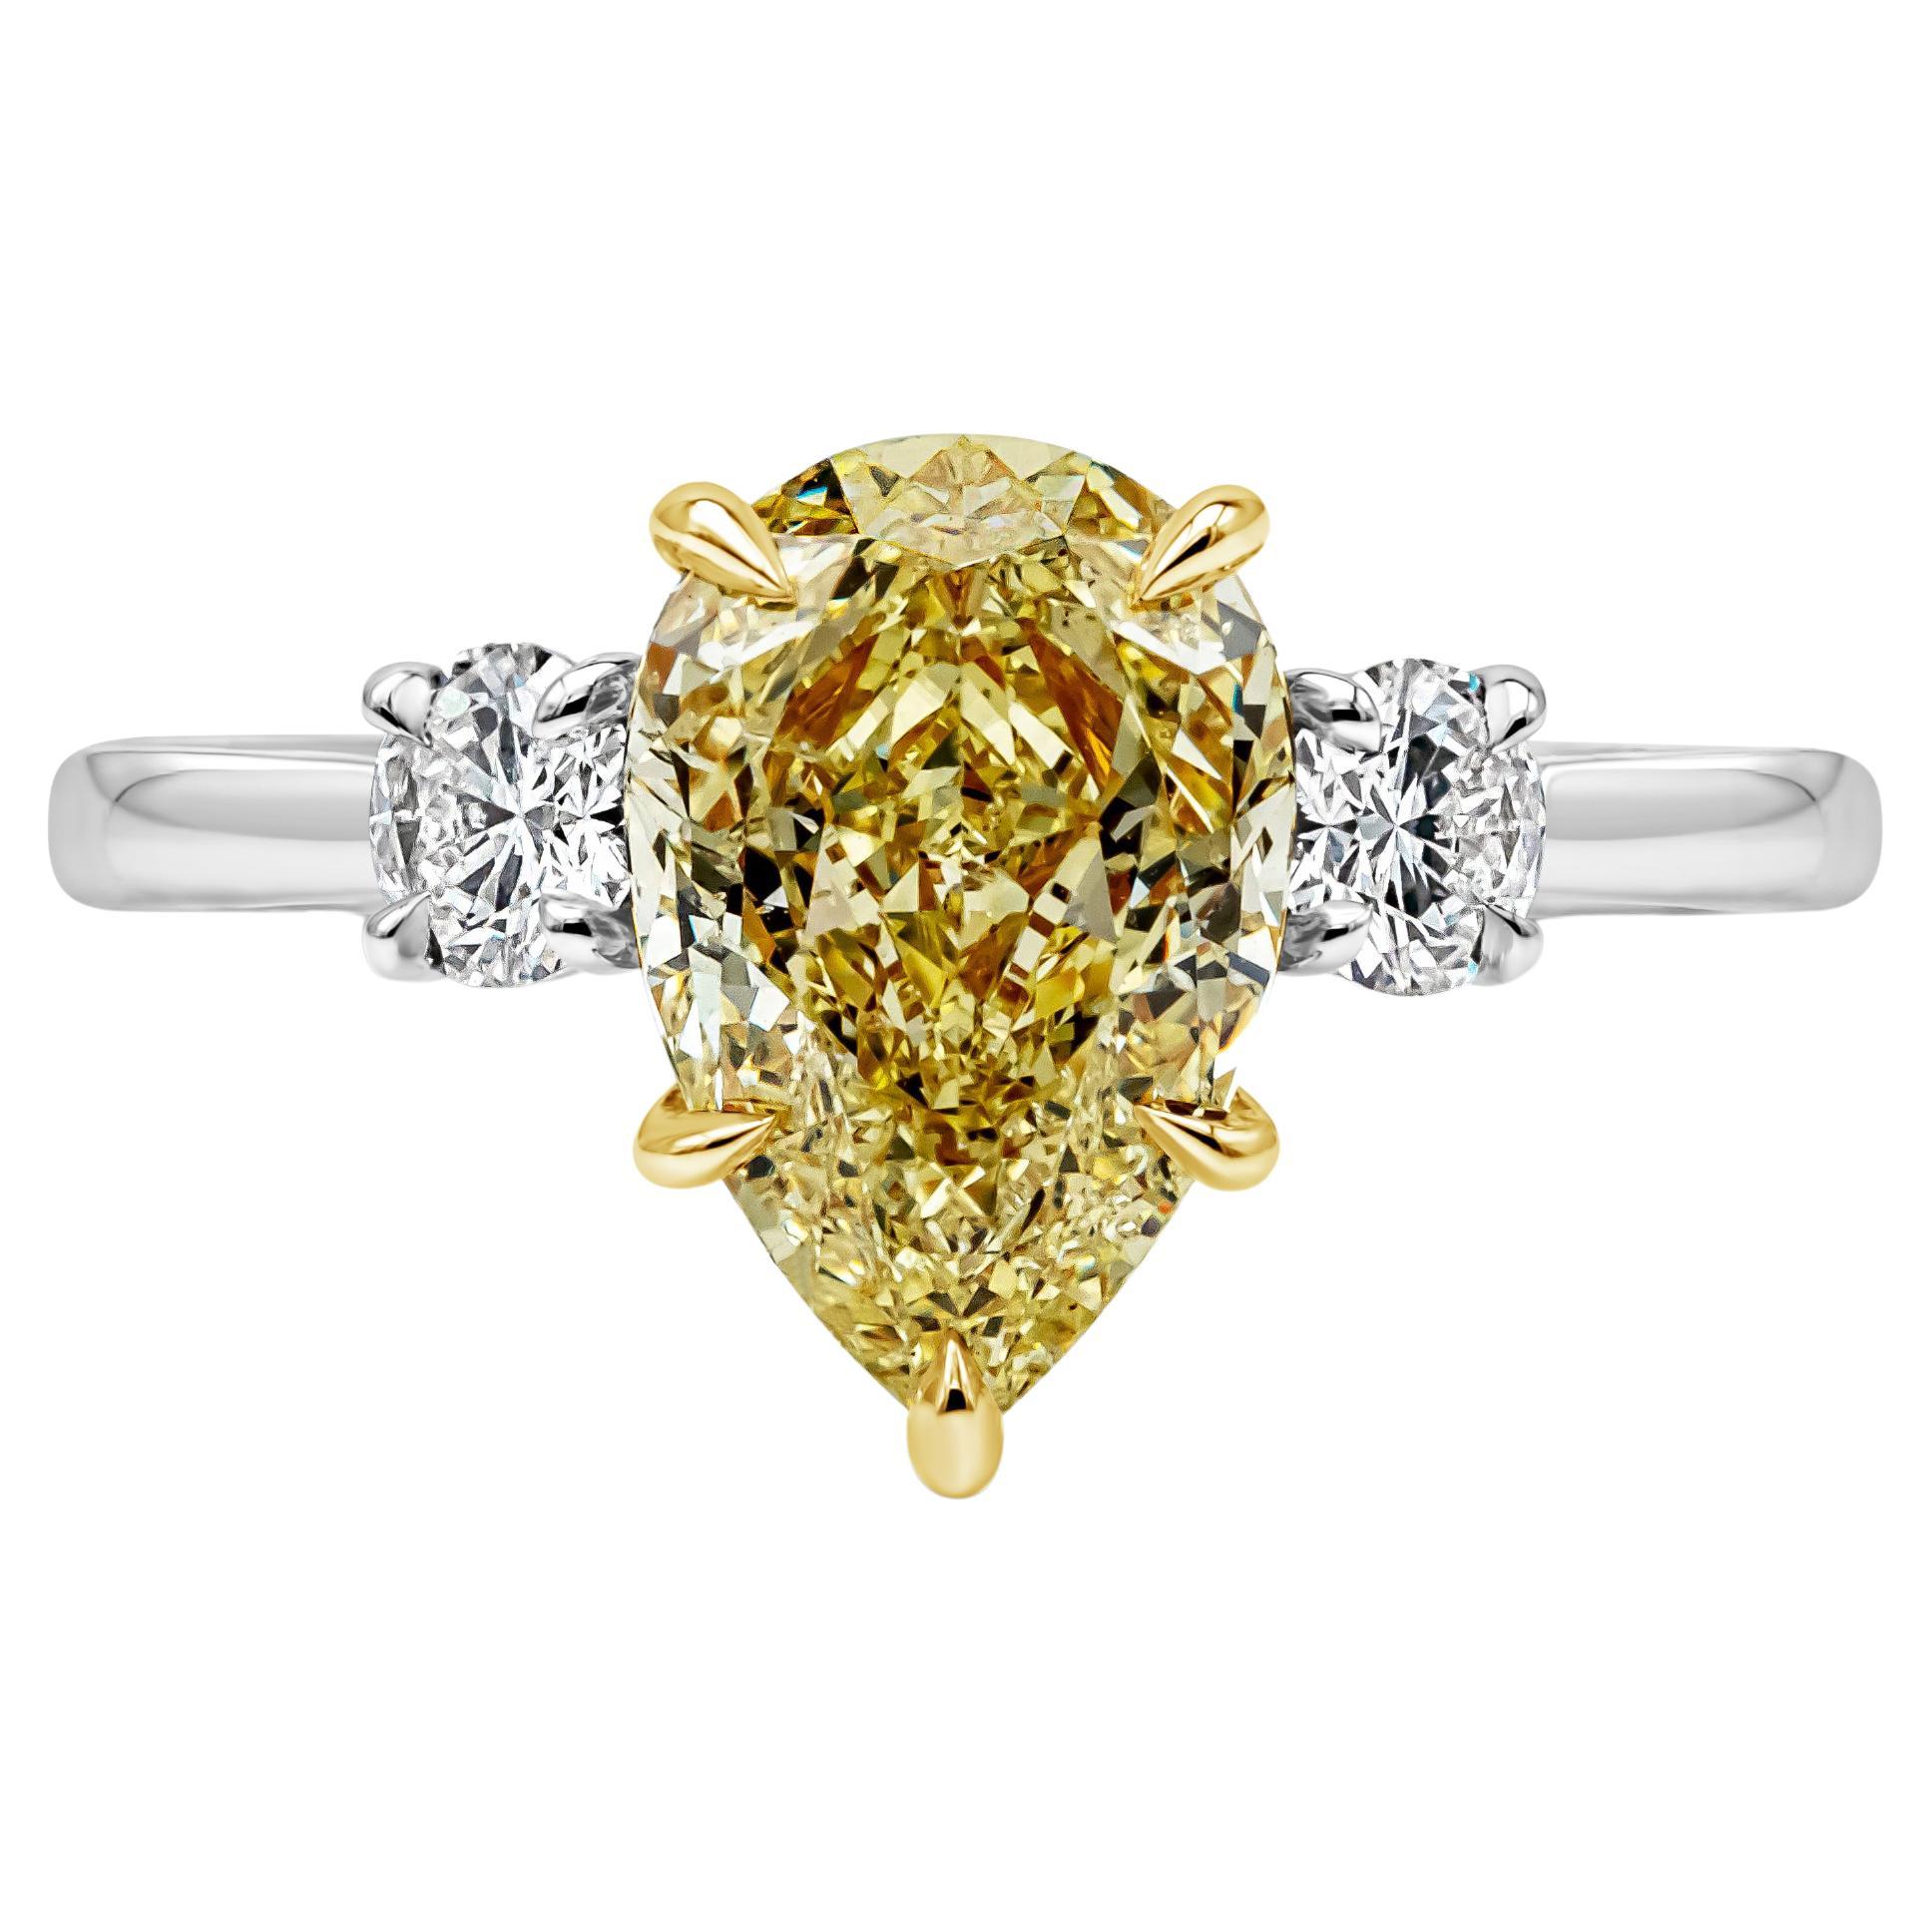 GIA Certified 2.53 Carat Pear Shape Fancy Yellow Diamond Engagement Ring For Sale